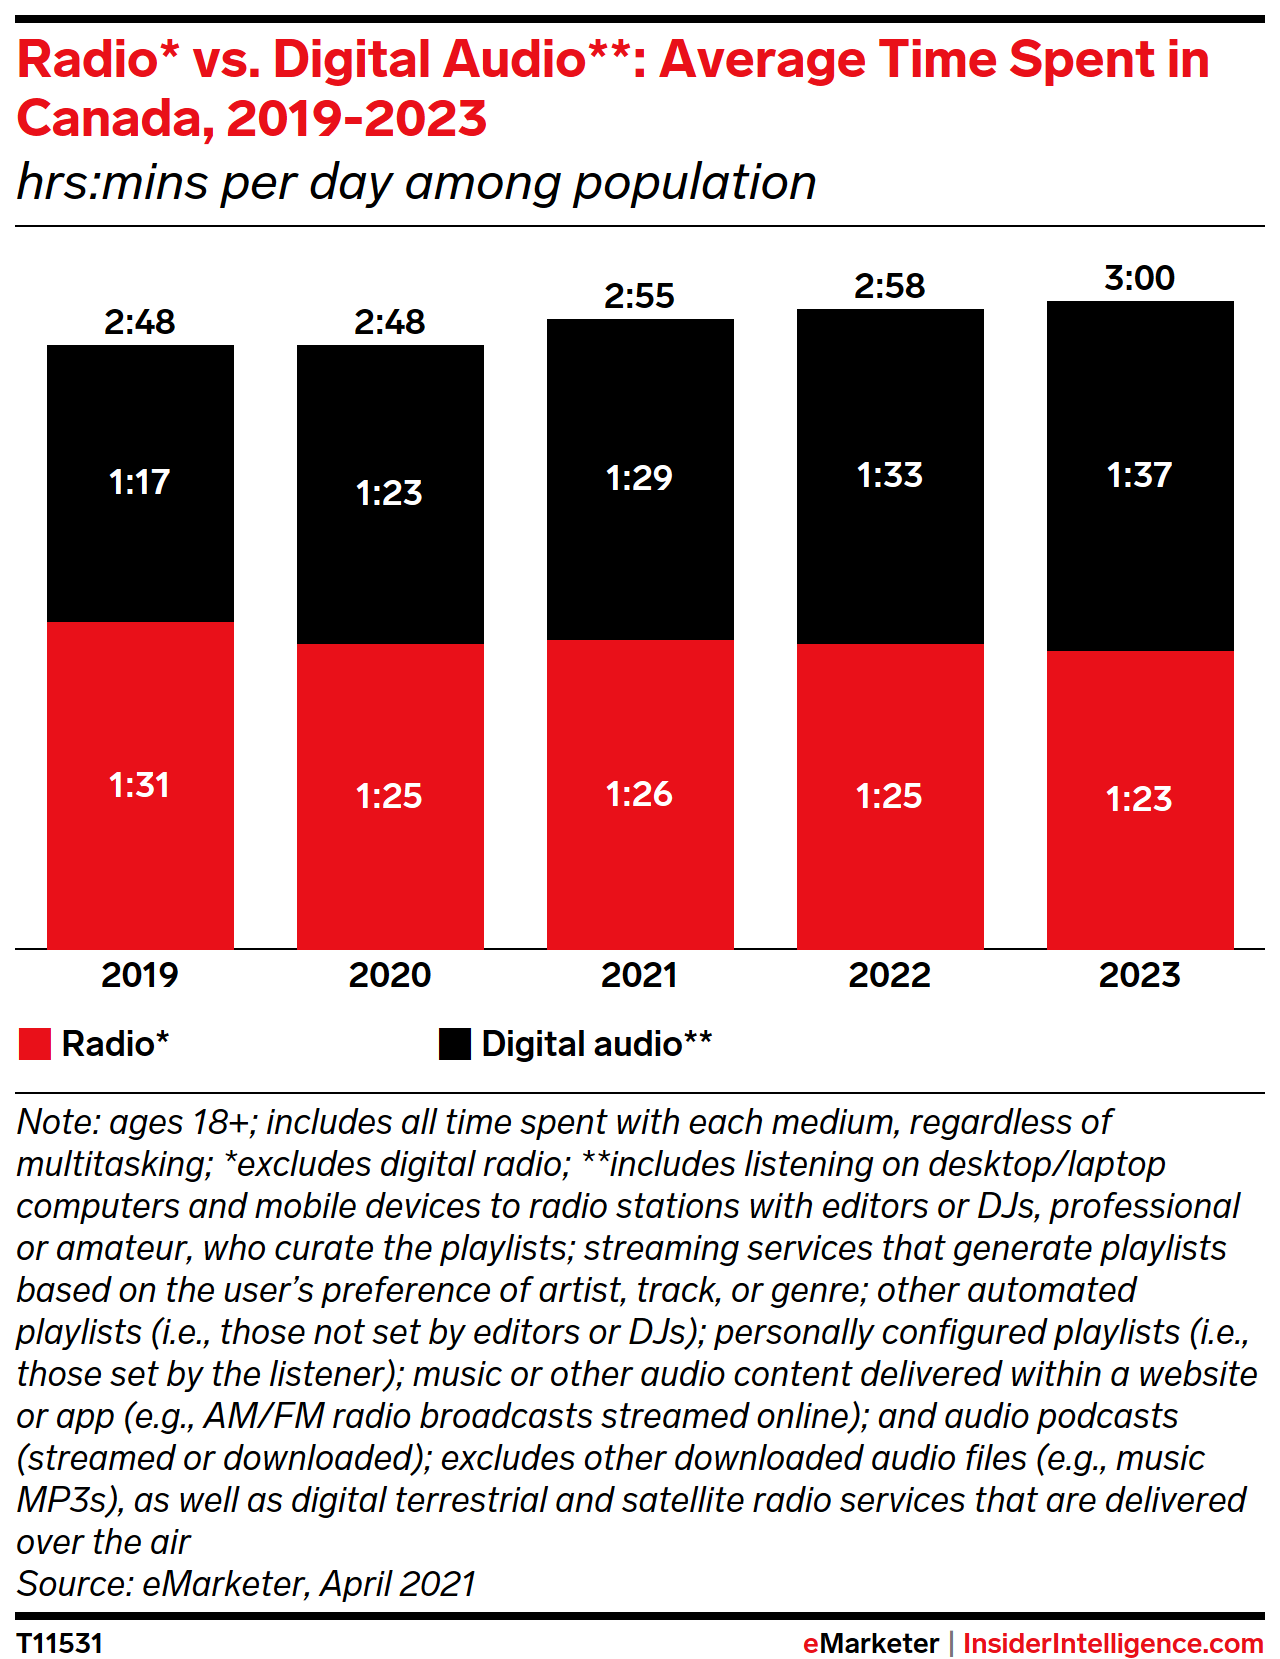 Radio* vs. Digital Audio**: Average Time Spent in Canada, 2019-2023 (hrs:mins per day among population)